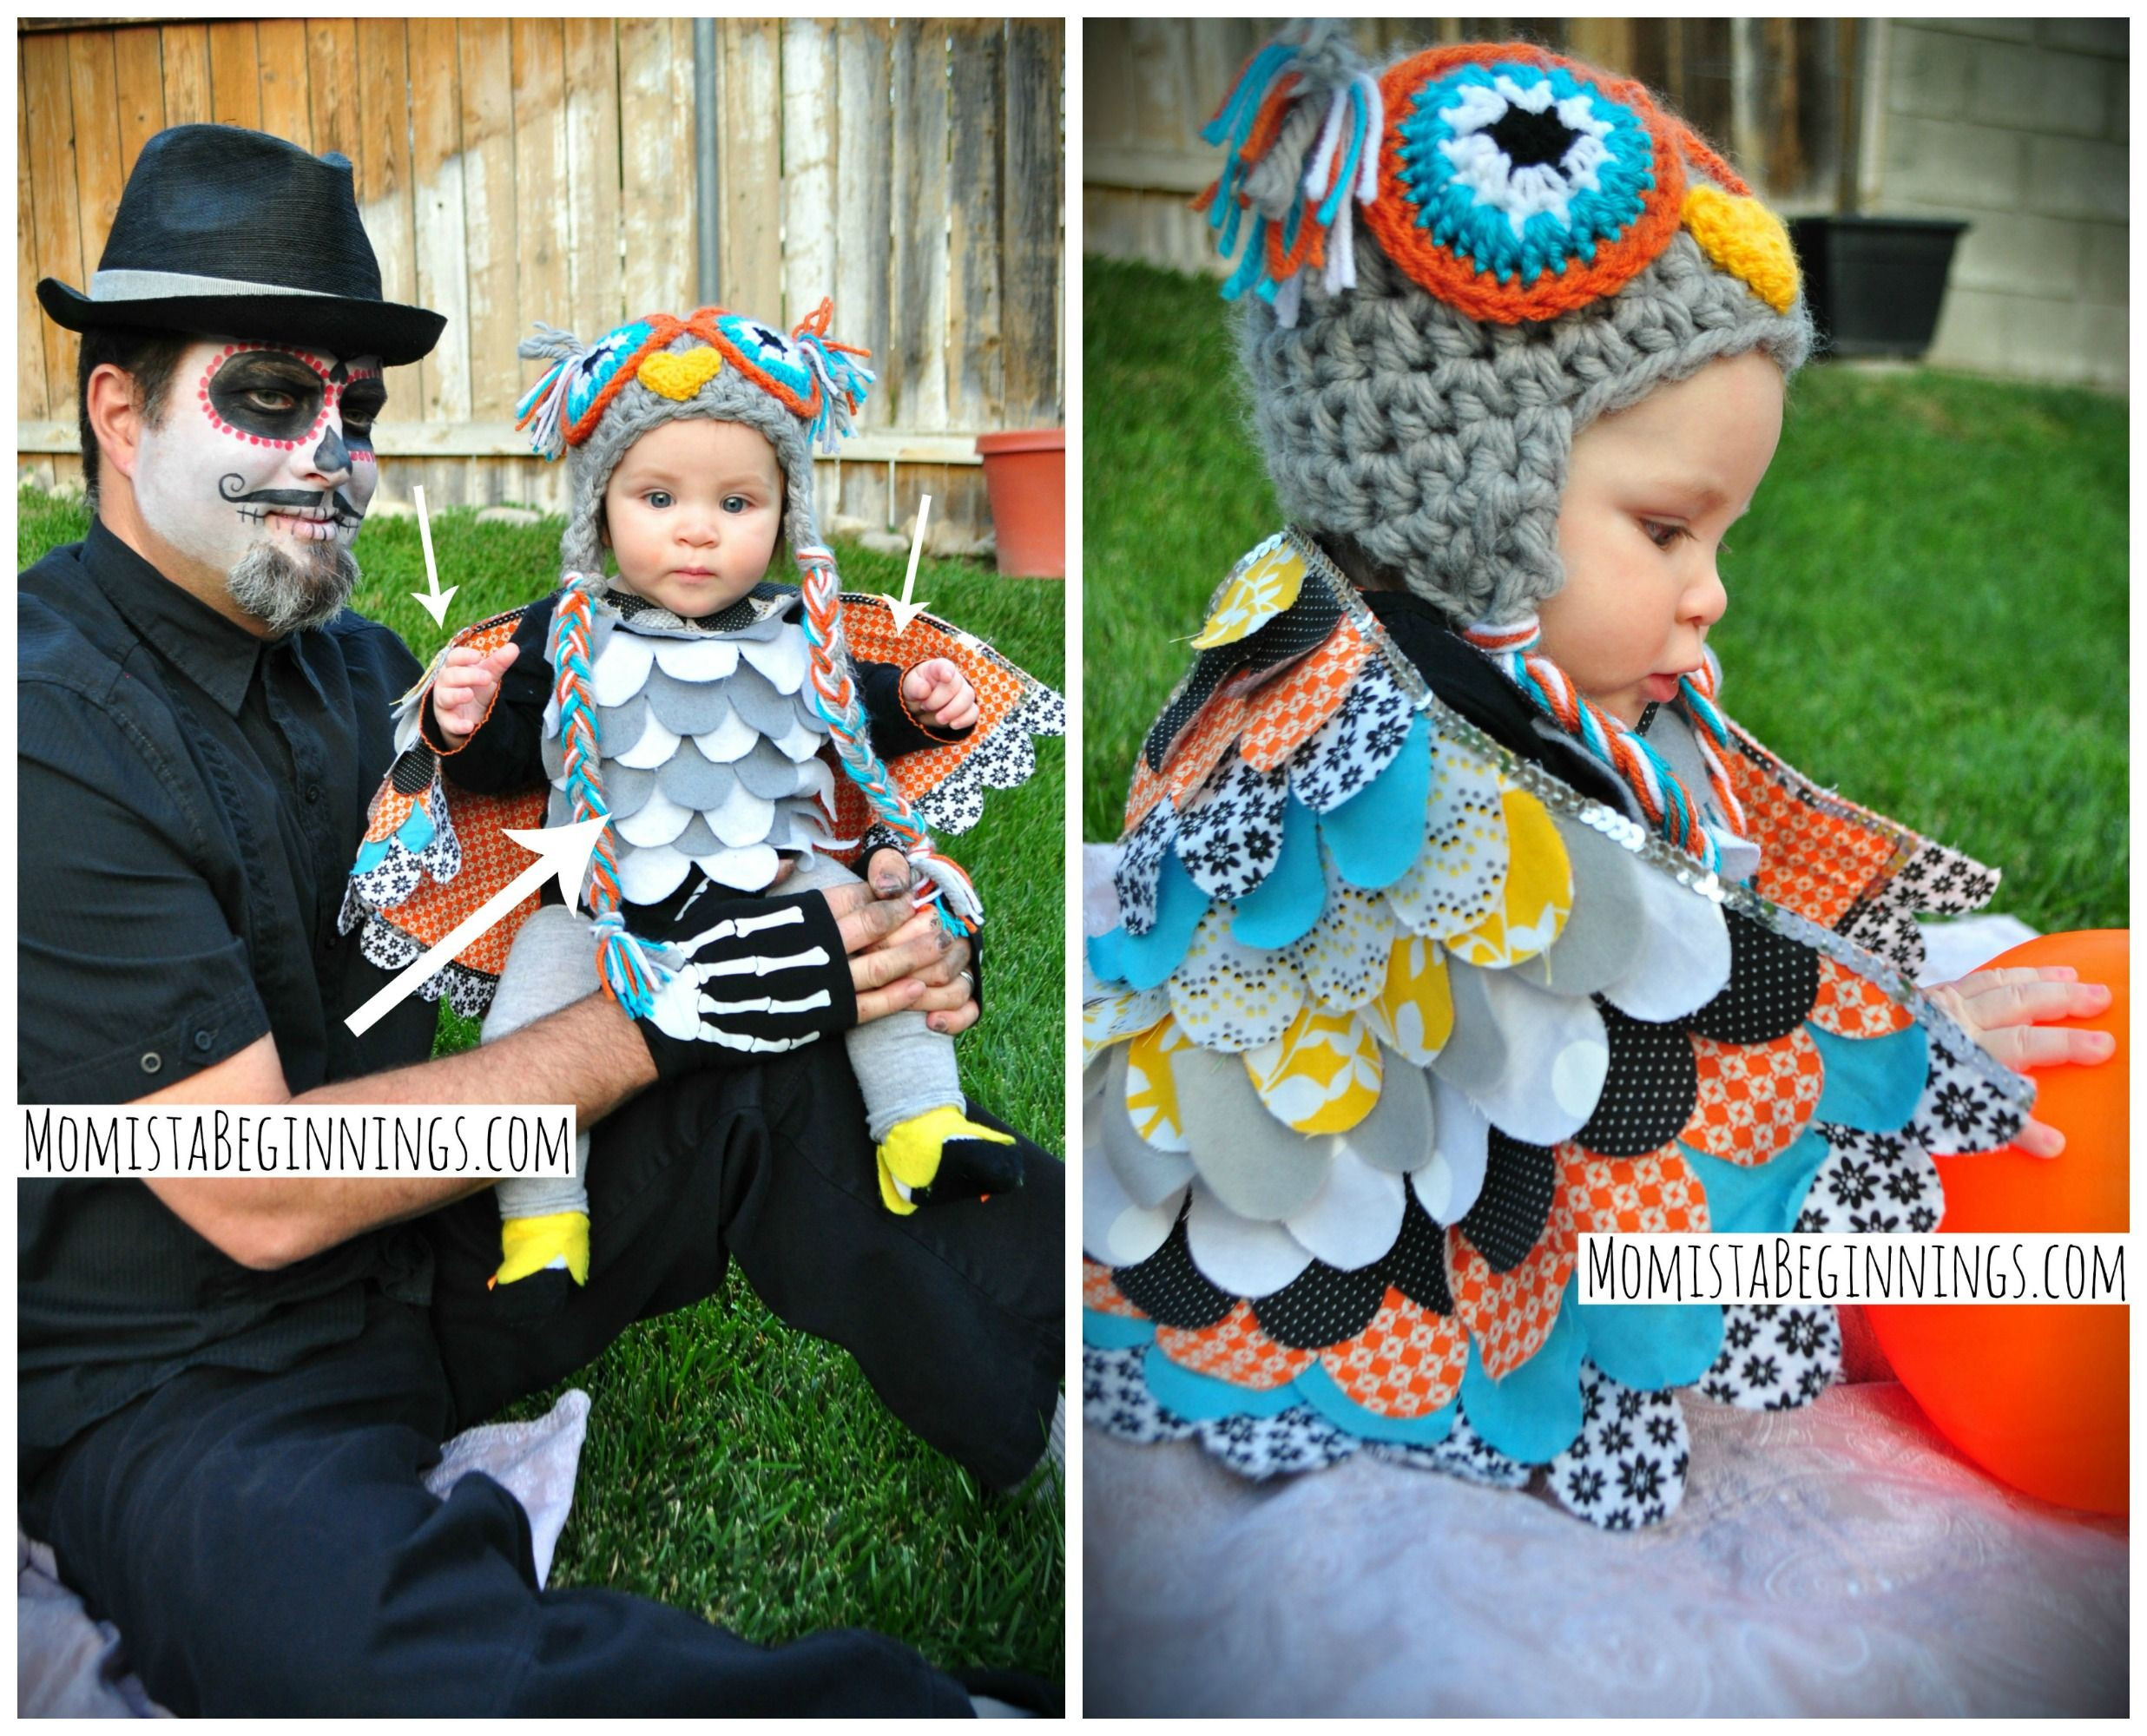 DIY Toddler Owl Costume
 A good tutorial that shows how to assemble owl wings